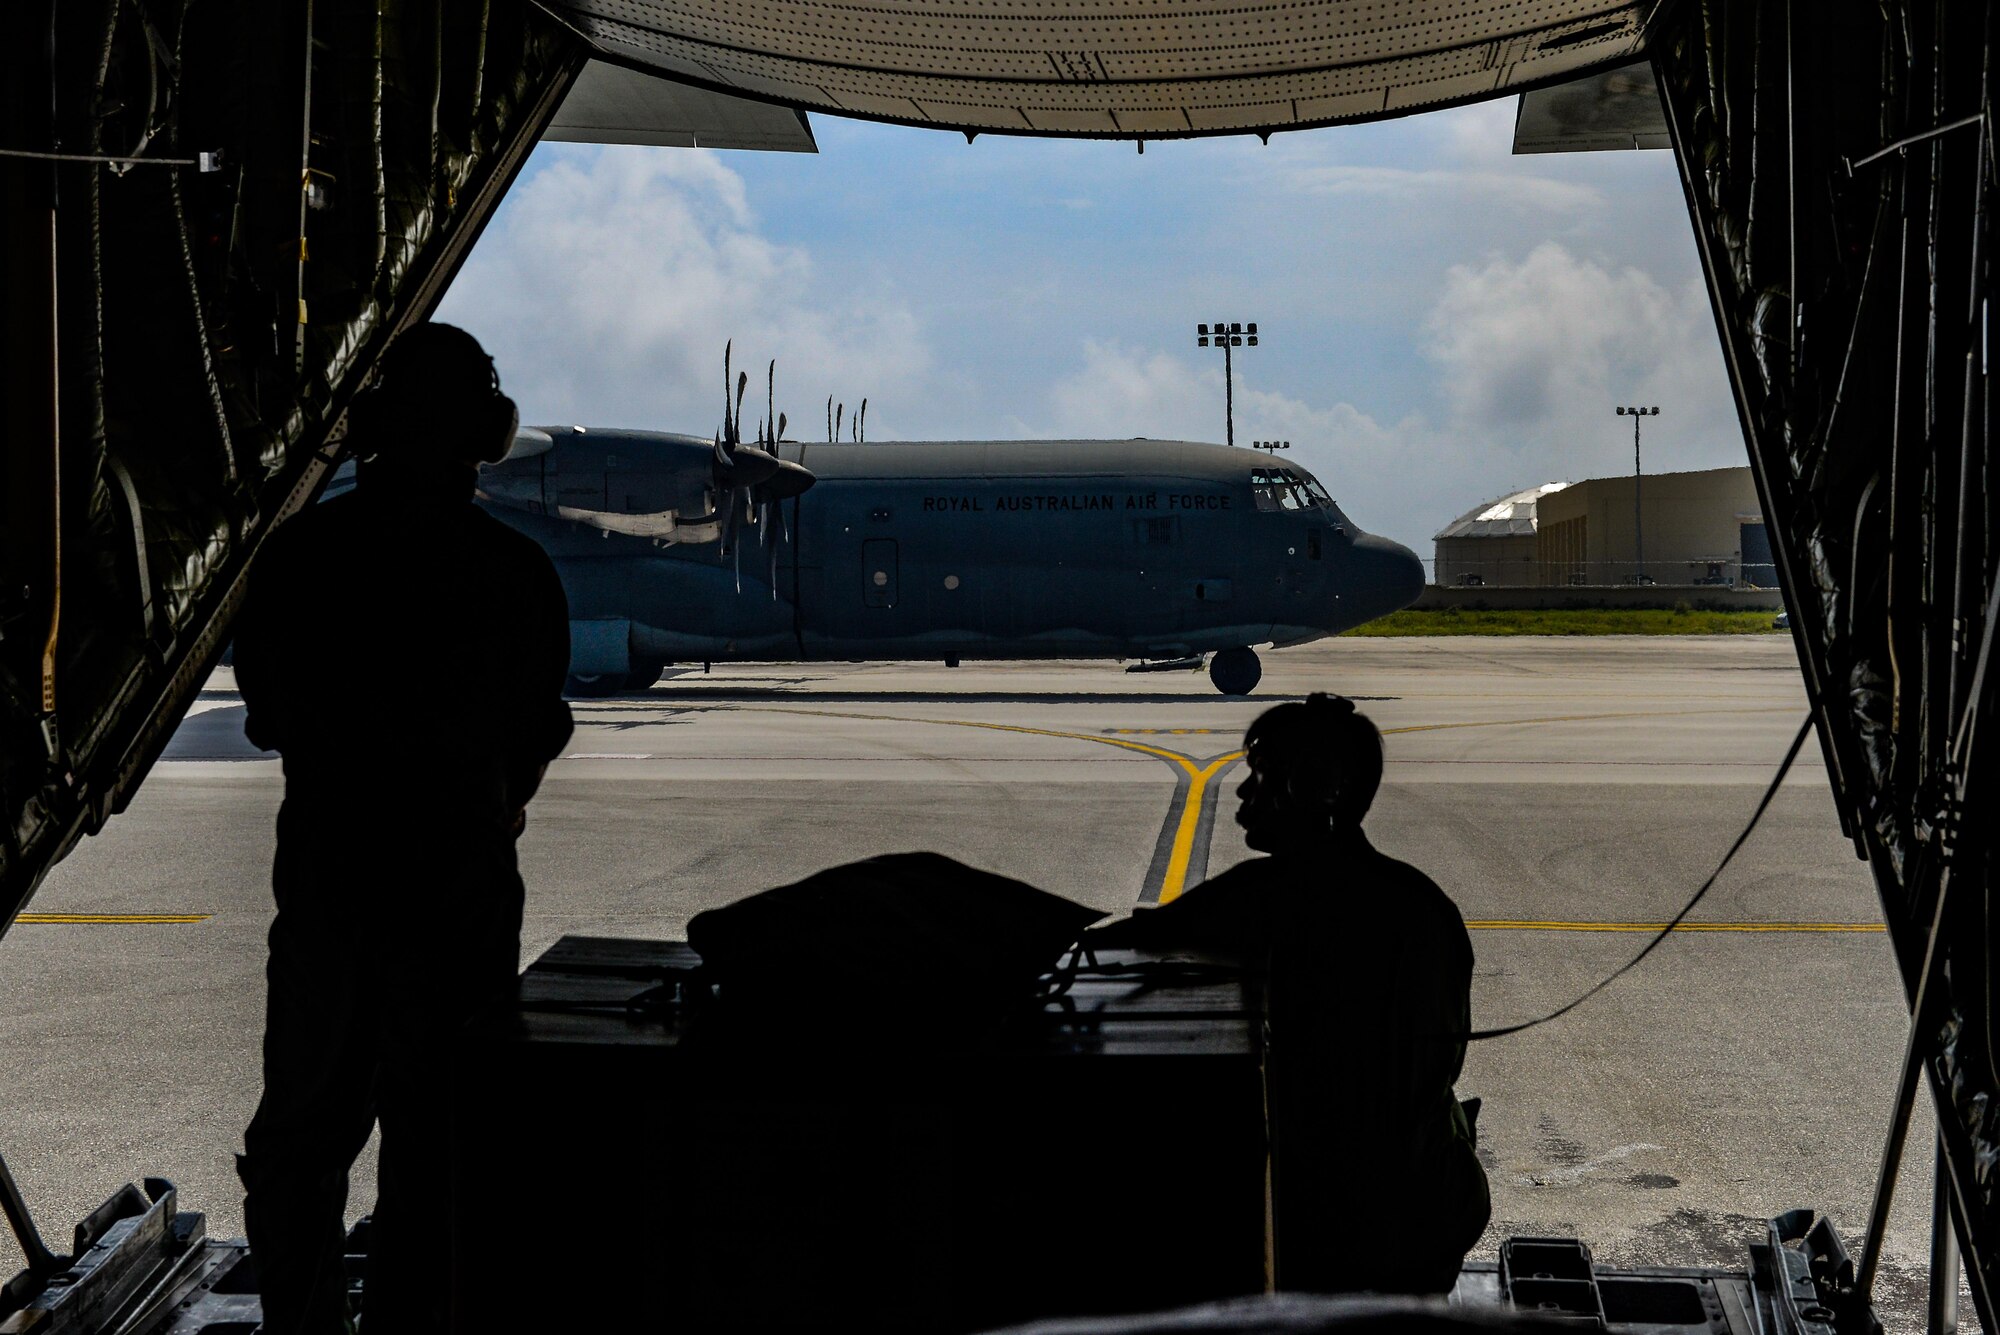 Japanese Master Sgt. Toyonaga Toshihisa, left, and Tech. Sgt. Takahashi Tetsuki, both loadmasters with the Japanese Air Self-Defense Force 1st Tactical Airlift Wing, watch as a Royal Australian Air Force C-130J Hercules taxis along the flightline Dec. 8, 2015, at Andersen Air Force Base, Guam. The 64th year of Christmas Drop, which began in 1952, marked the first time international aviators from Japan and Australia joined the humanitarian airdrop mission. (U.S. Air Force photo/Staff Sgt. Alexander W. Riedel)